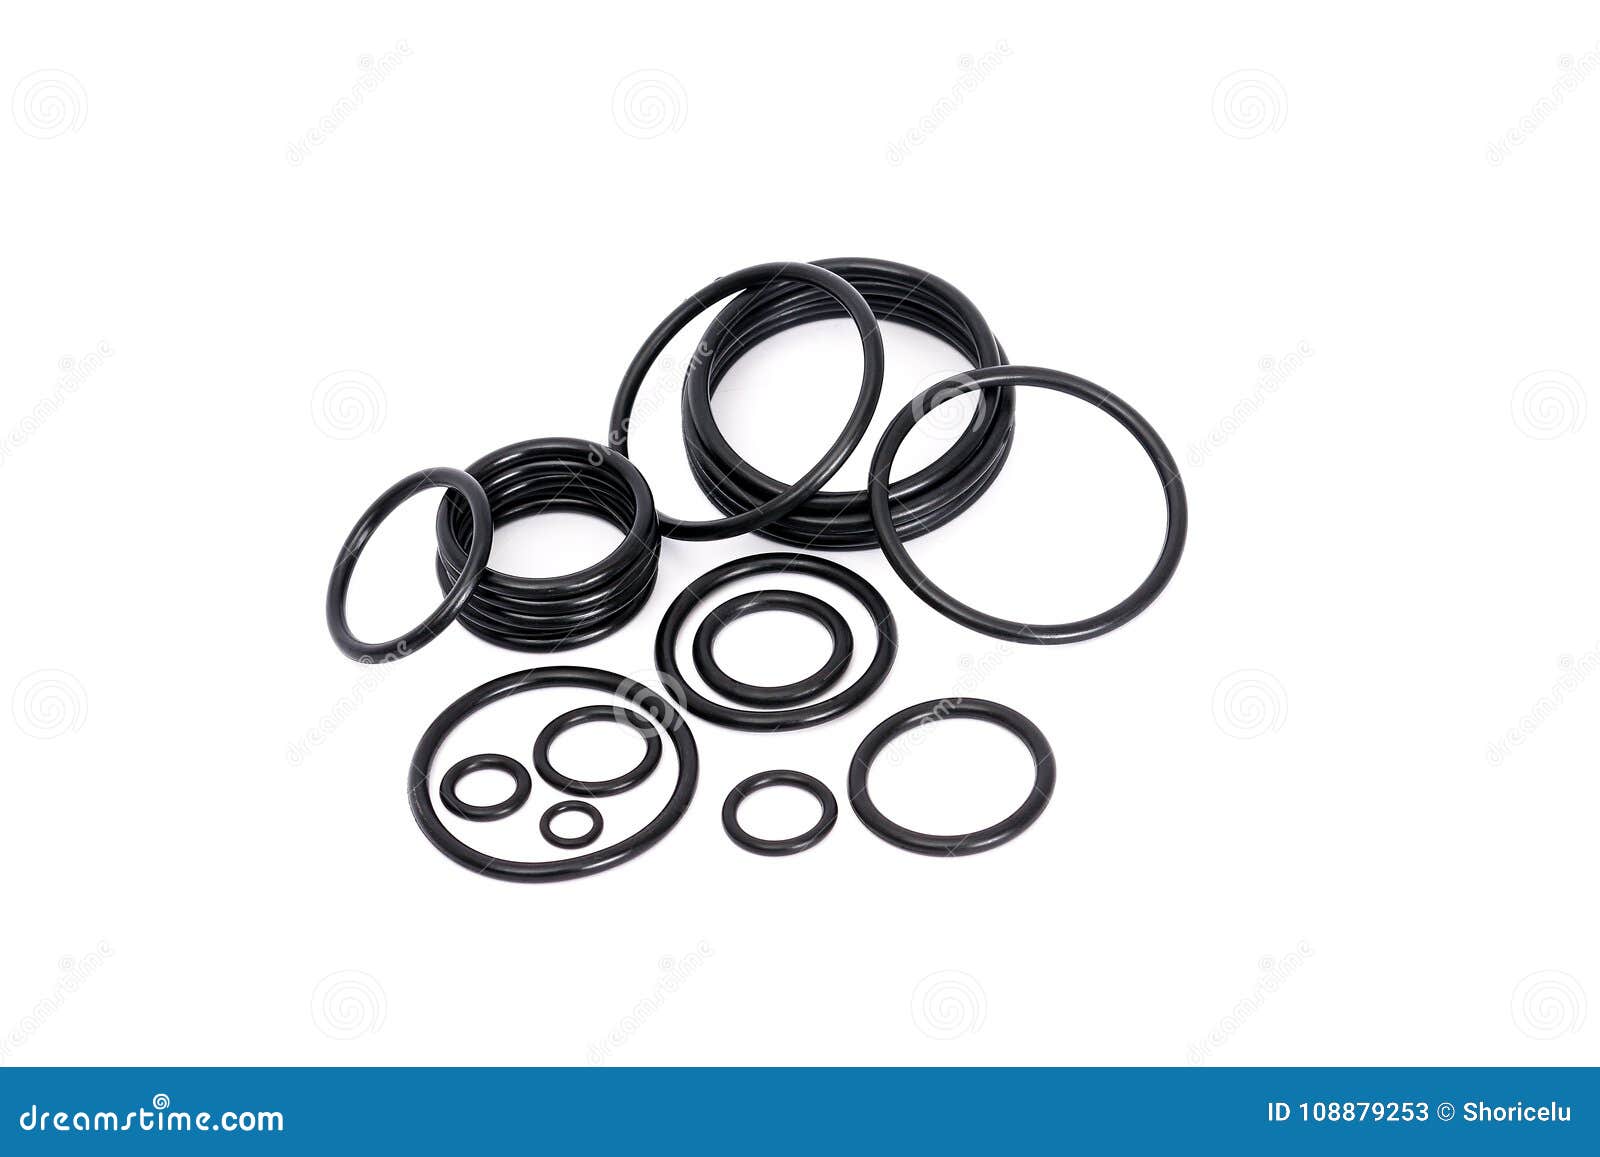 Custom B7 Hydraulic Cylinder Piston Seal Types Piston Sealant factory and  suppliers | DLSEALS